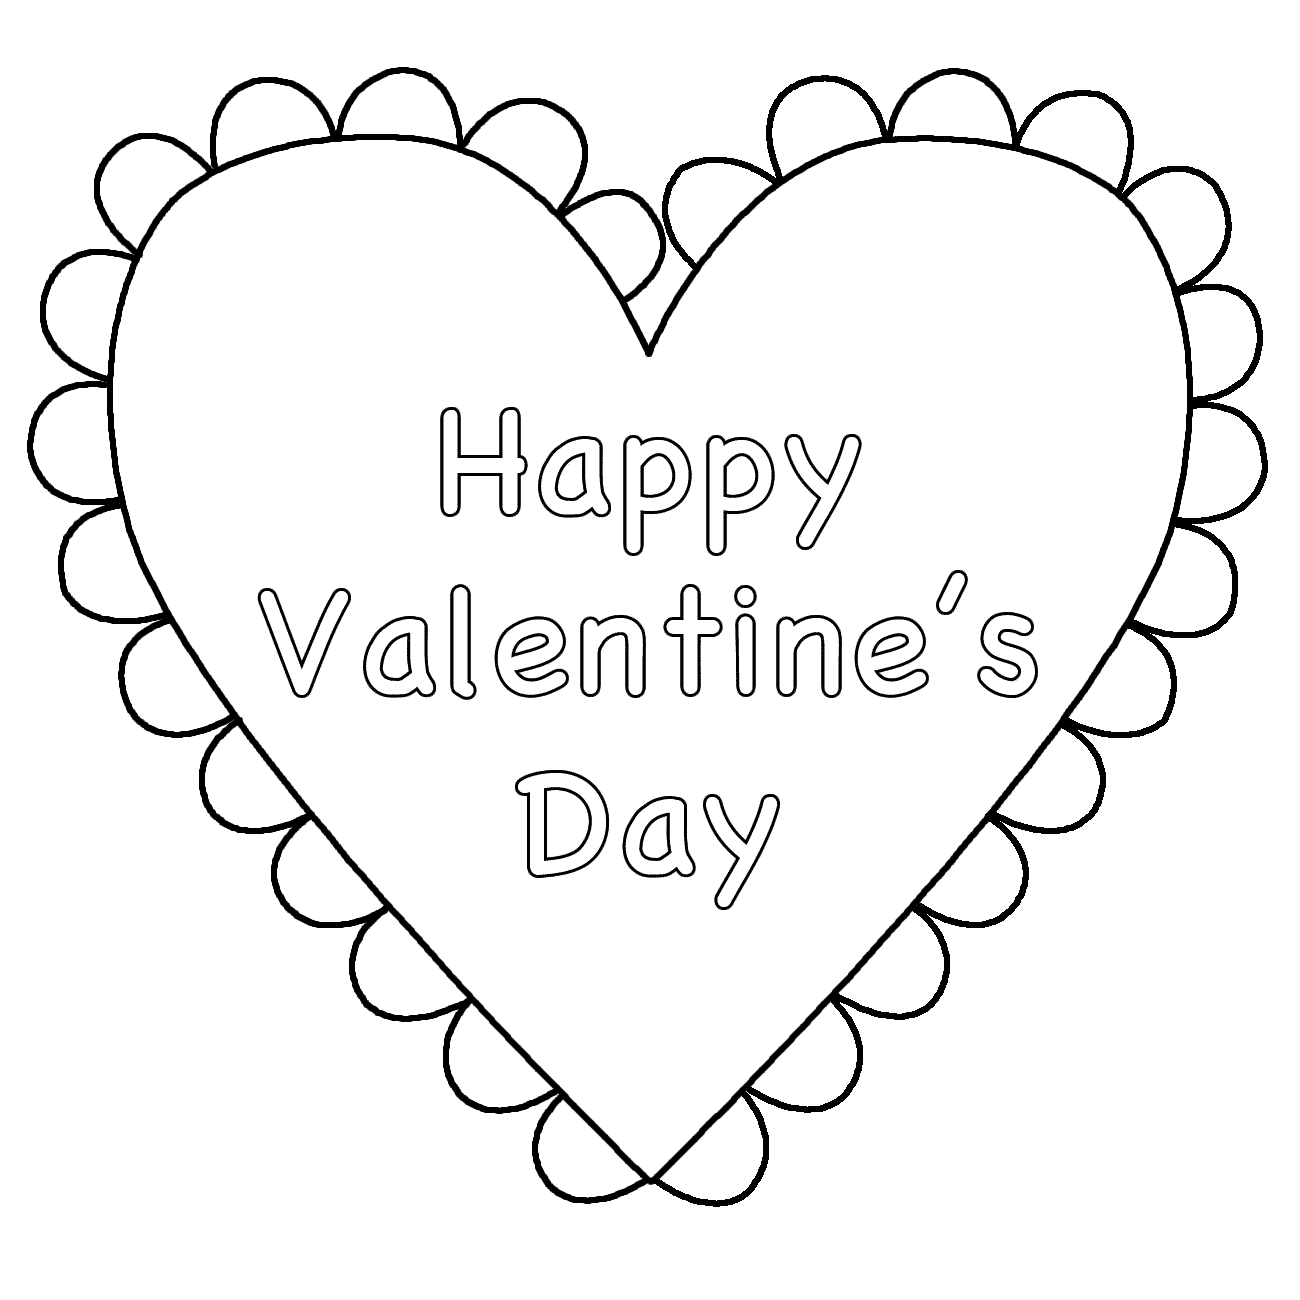 the-best-free-valentines-day-drawing-images-download-from-9325-free